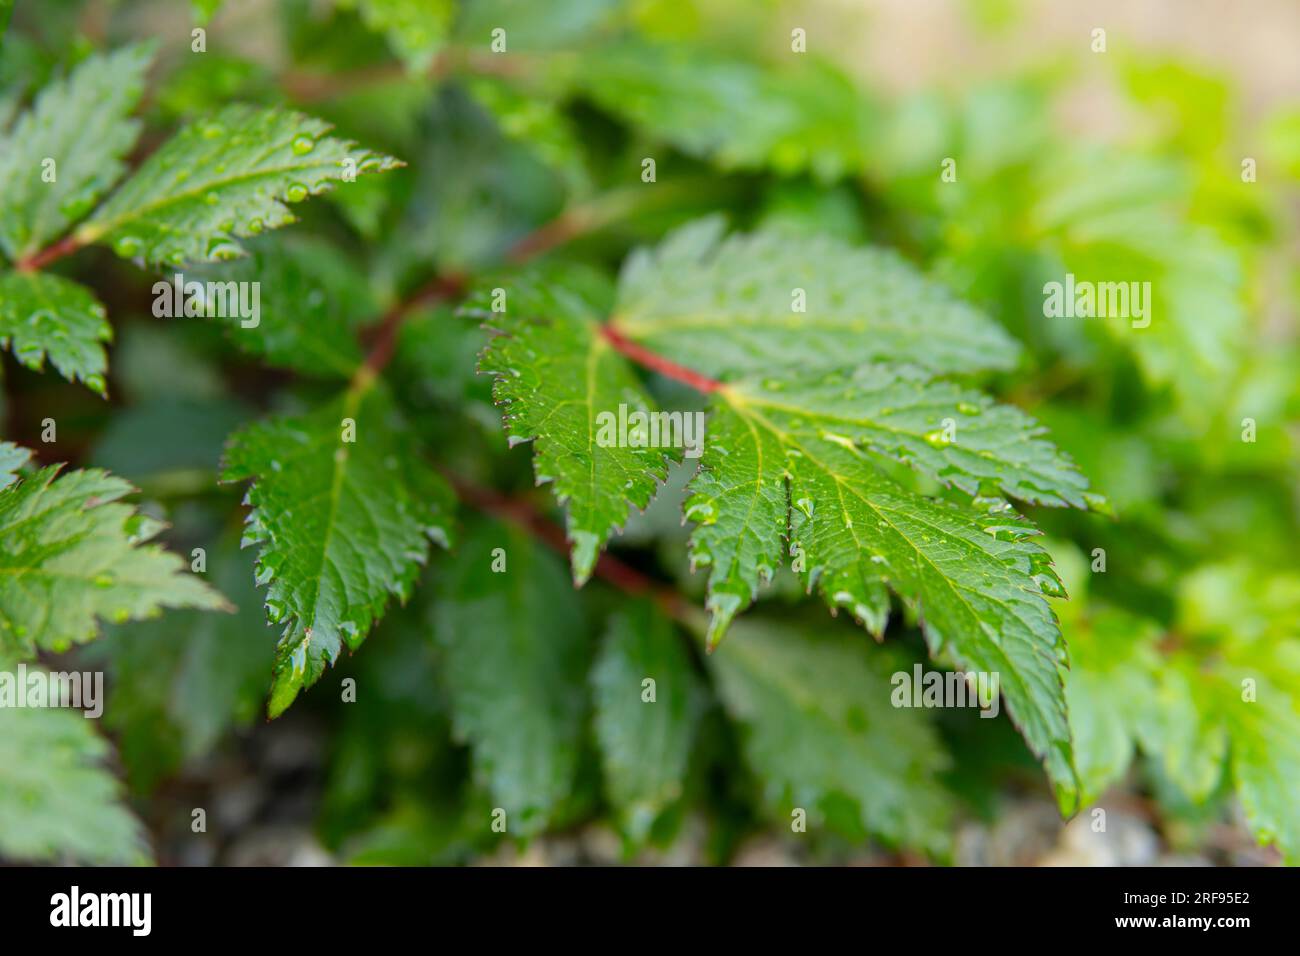 detail of a small flowering plant with green leaves and water drops after the rain Stock Photo